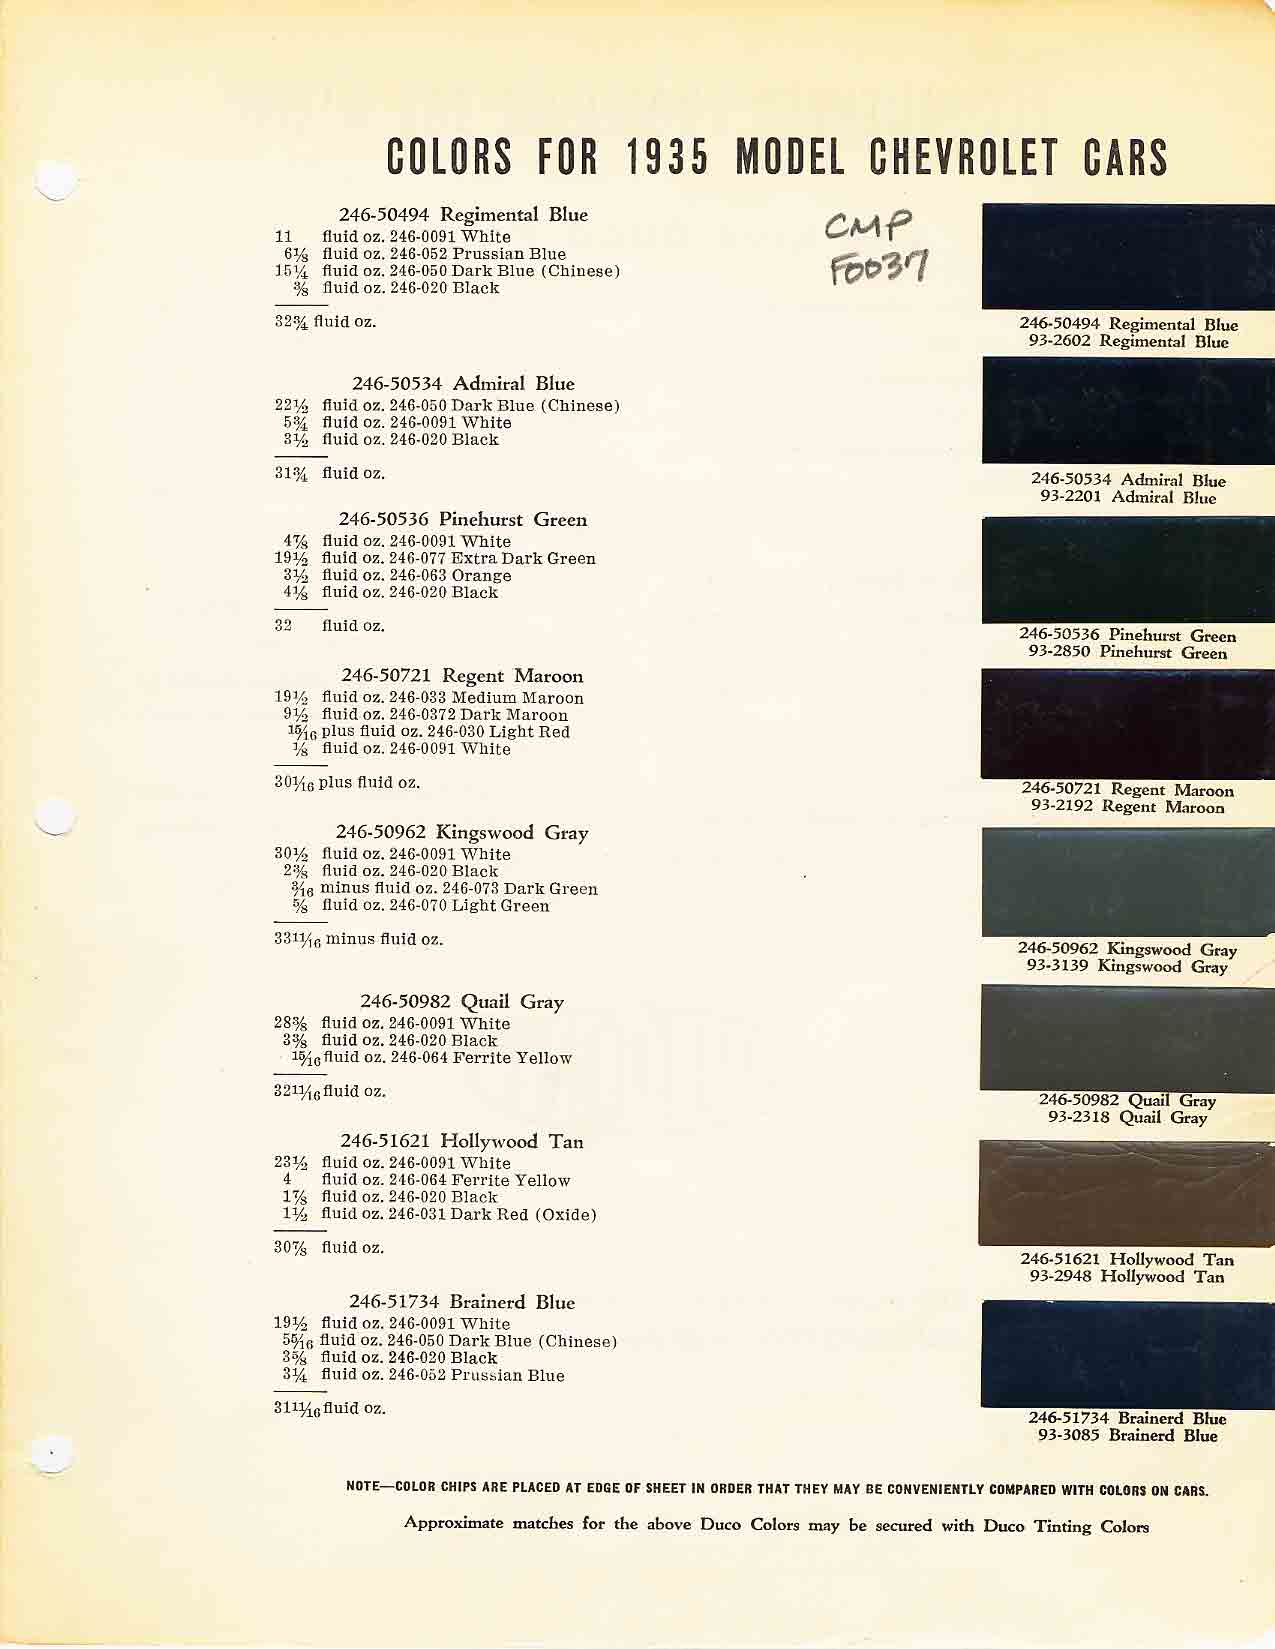 Colors and codes used on Chevrolet Vehicles in 1935